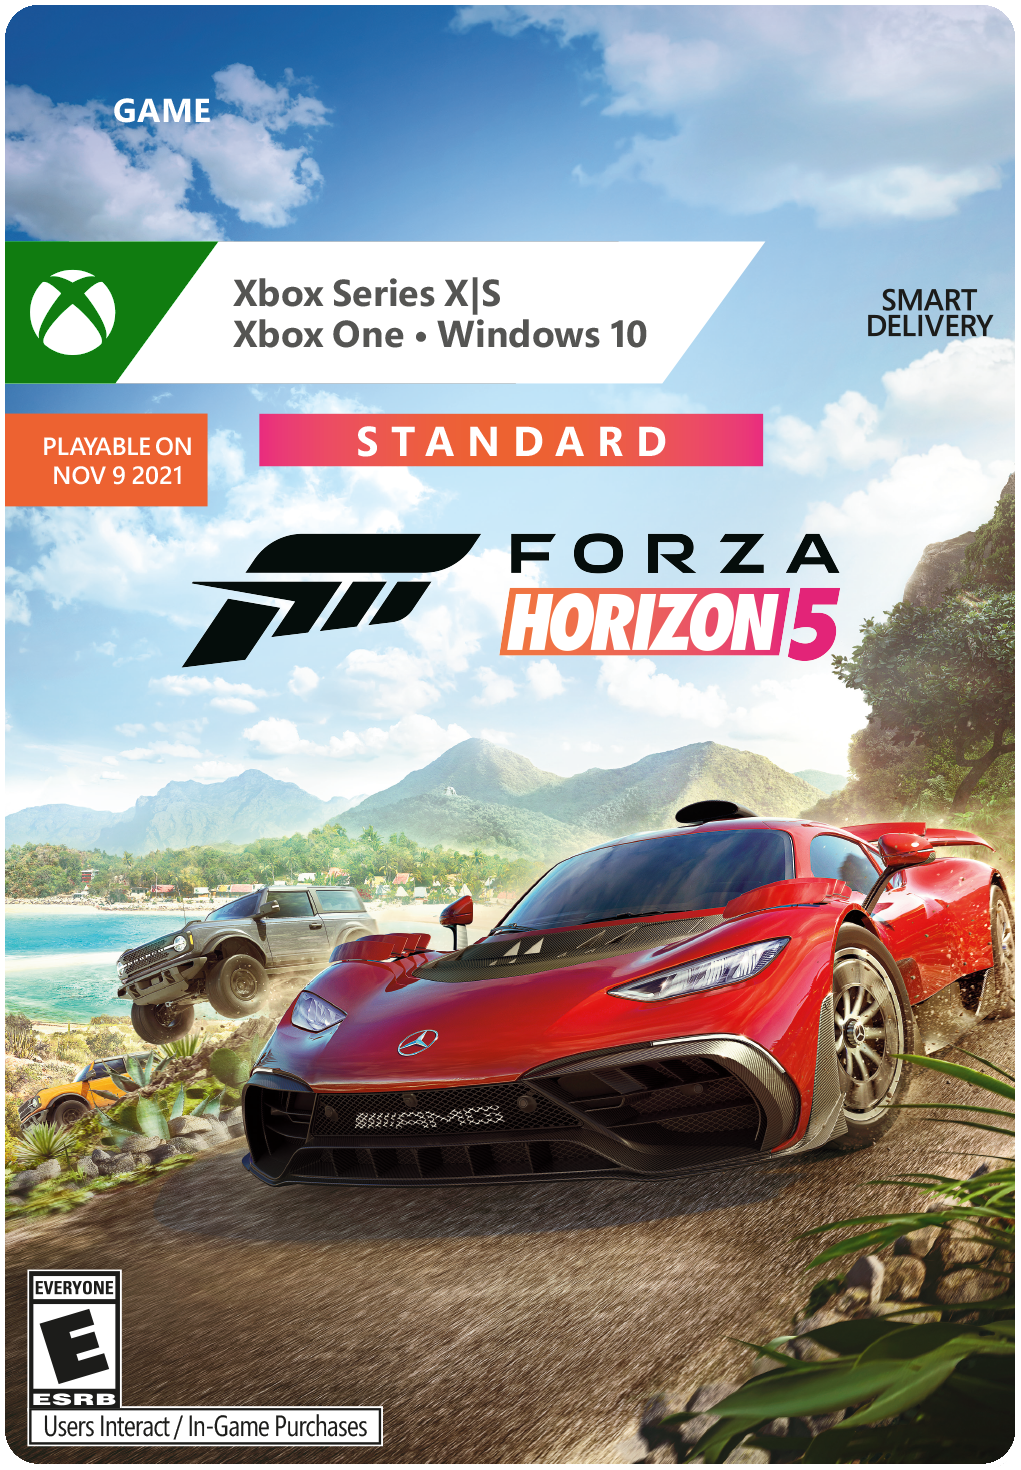 Deal Alert: Save $50 Off the Xbox Series X Forza Horizon 5 Console Bundle -  IGN